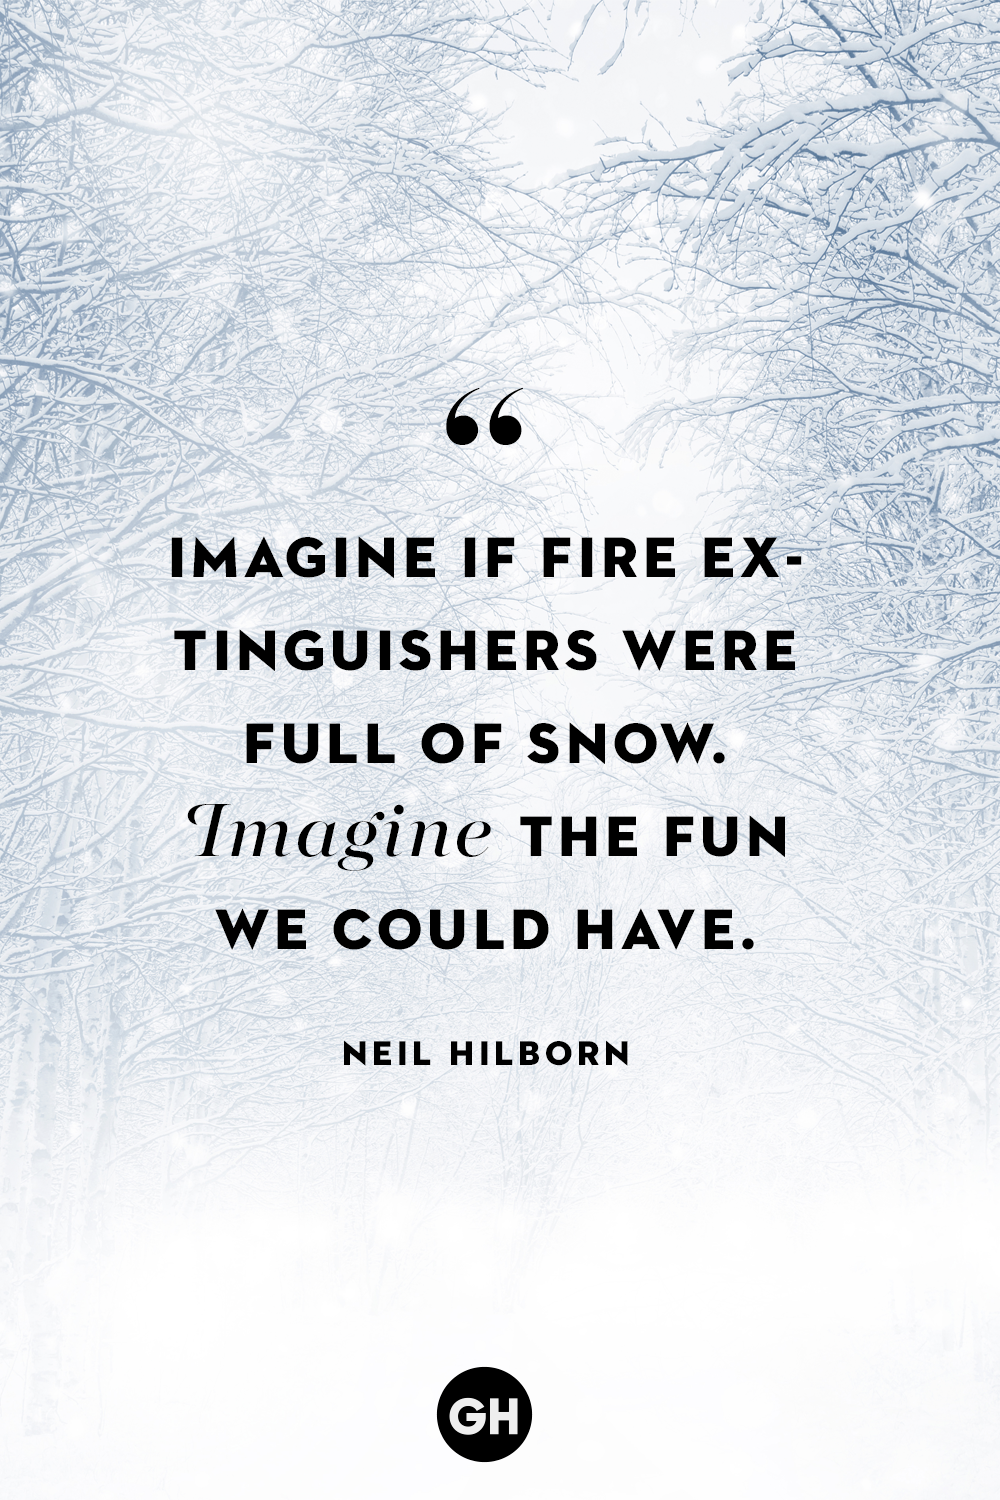 42 Best Winter Quotes - Short and Cute Sayings About Cold Weather